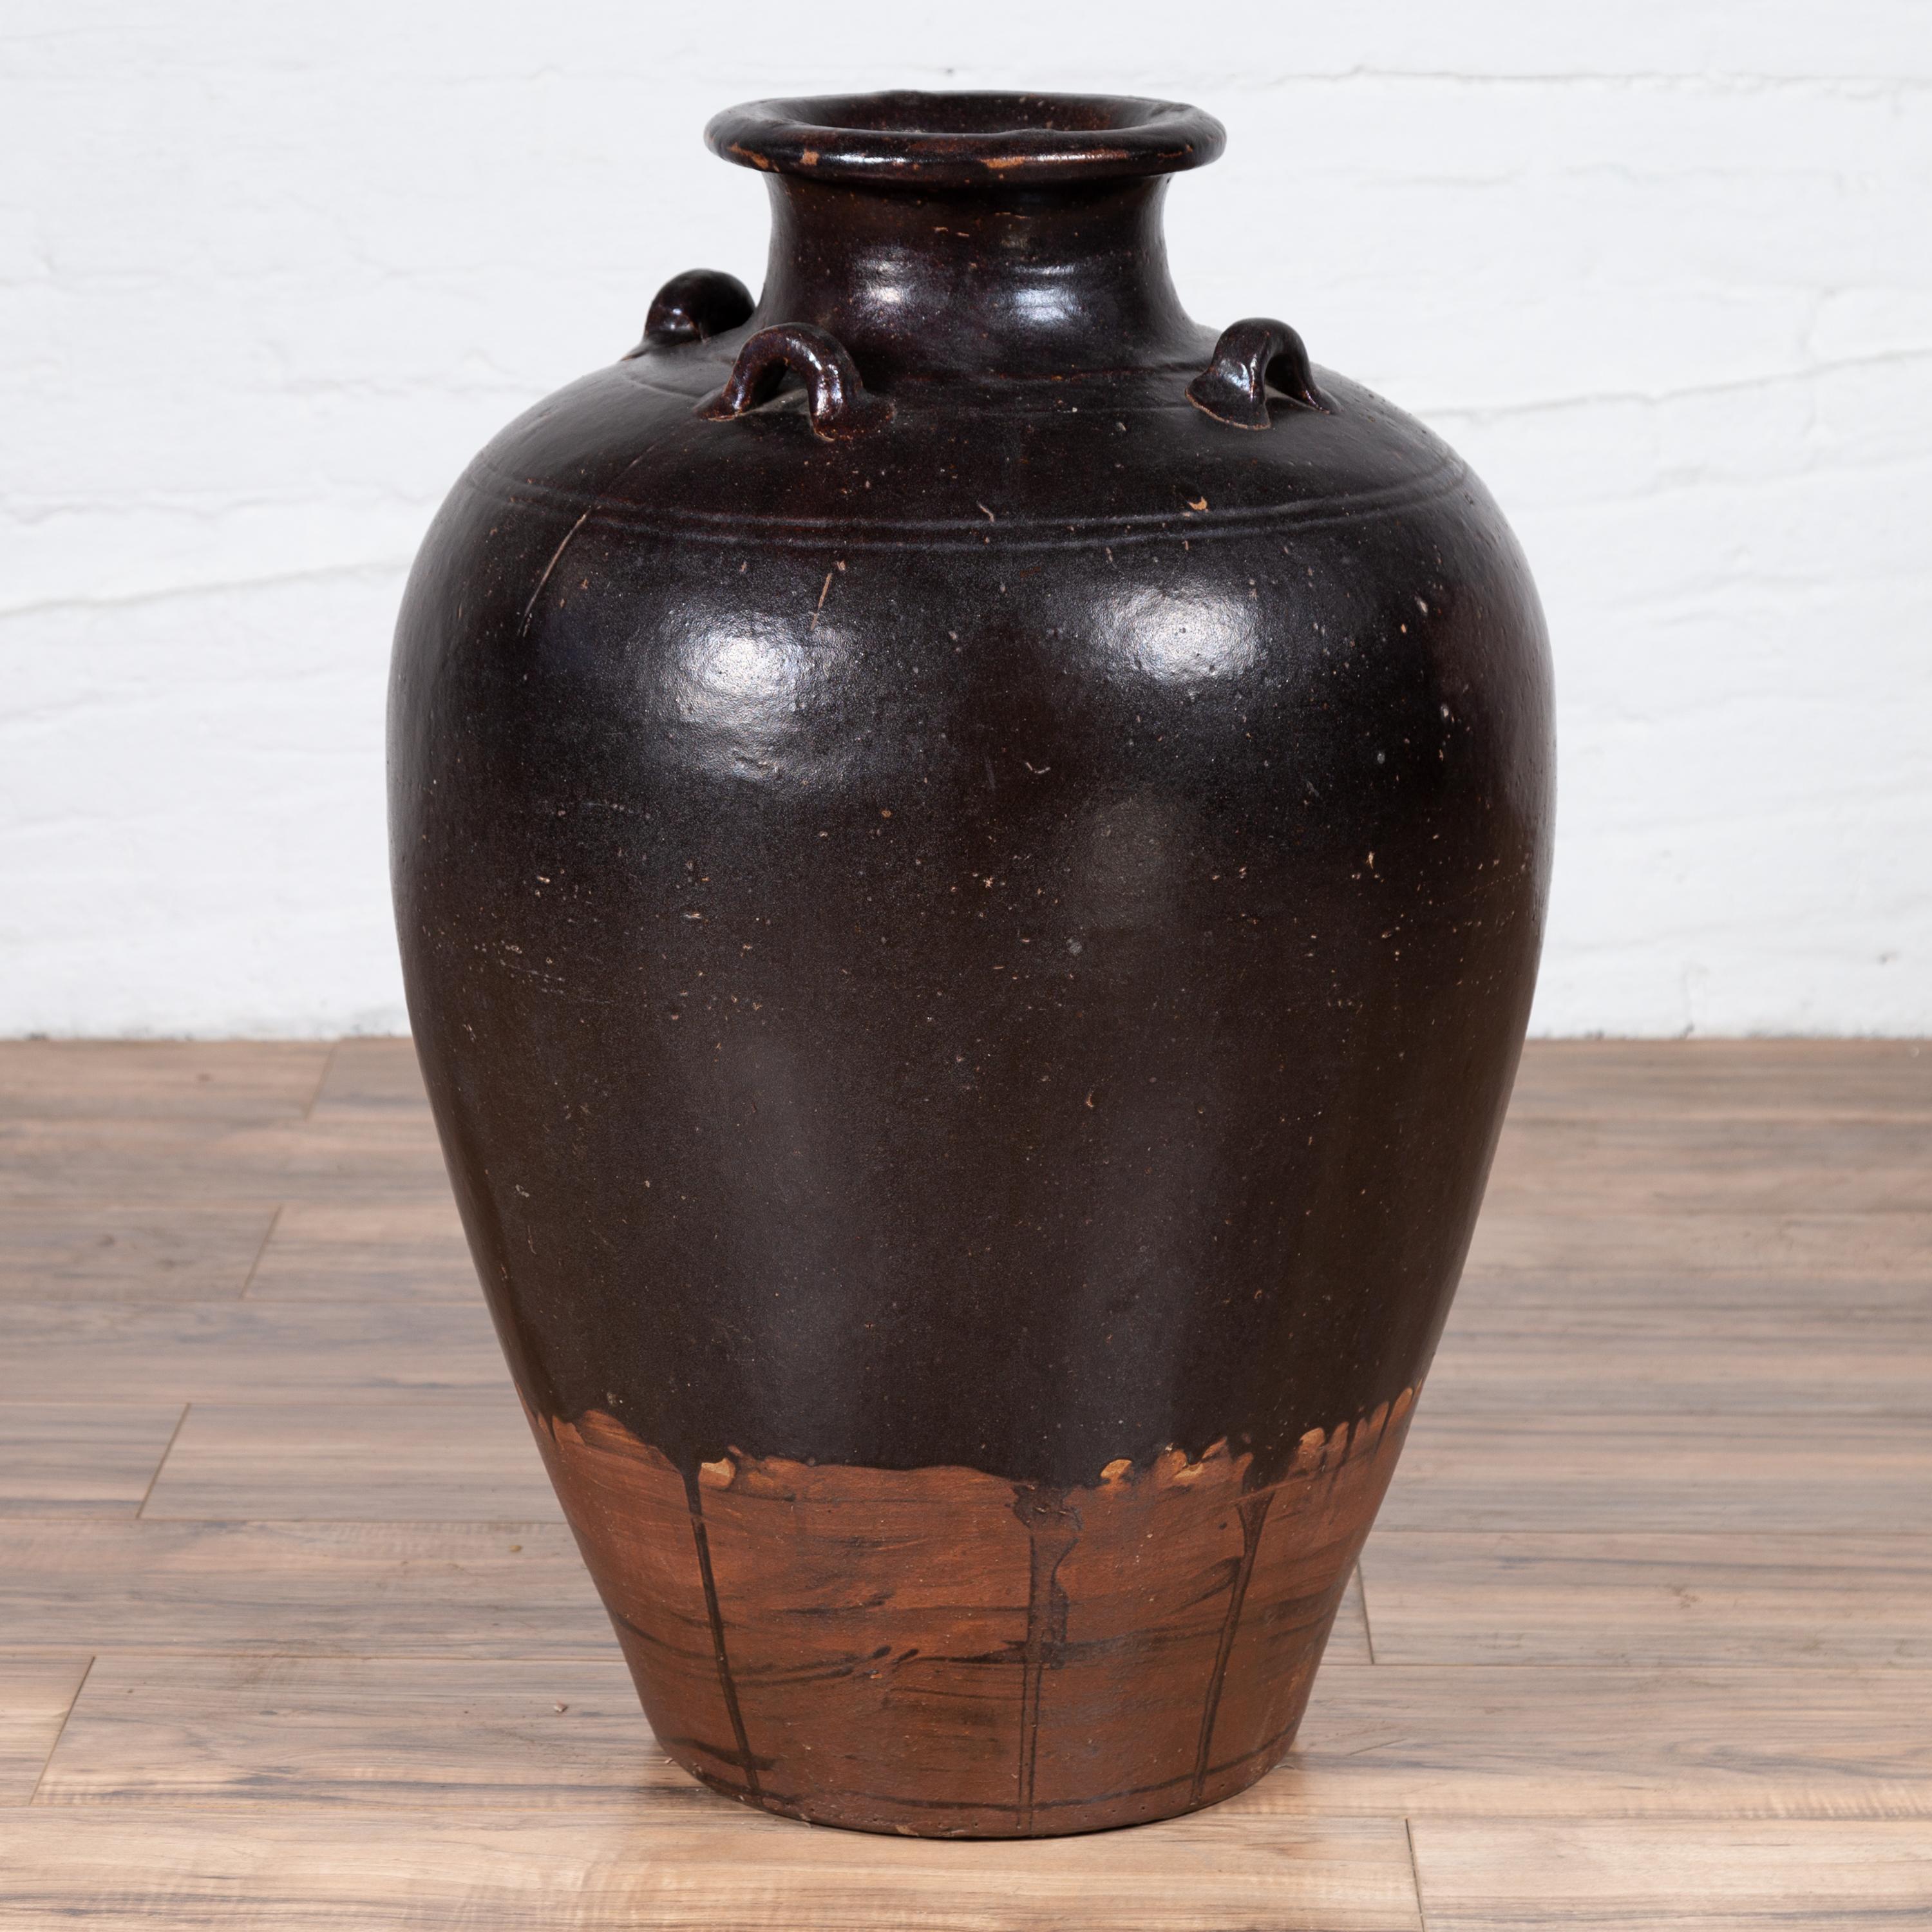 Glazed Thai Brownware Monochrome Water Jar with Carrying Handles, Early 20th Century For Sale